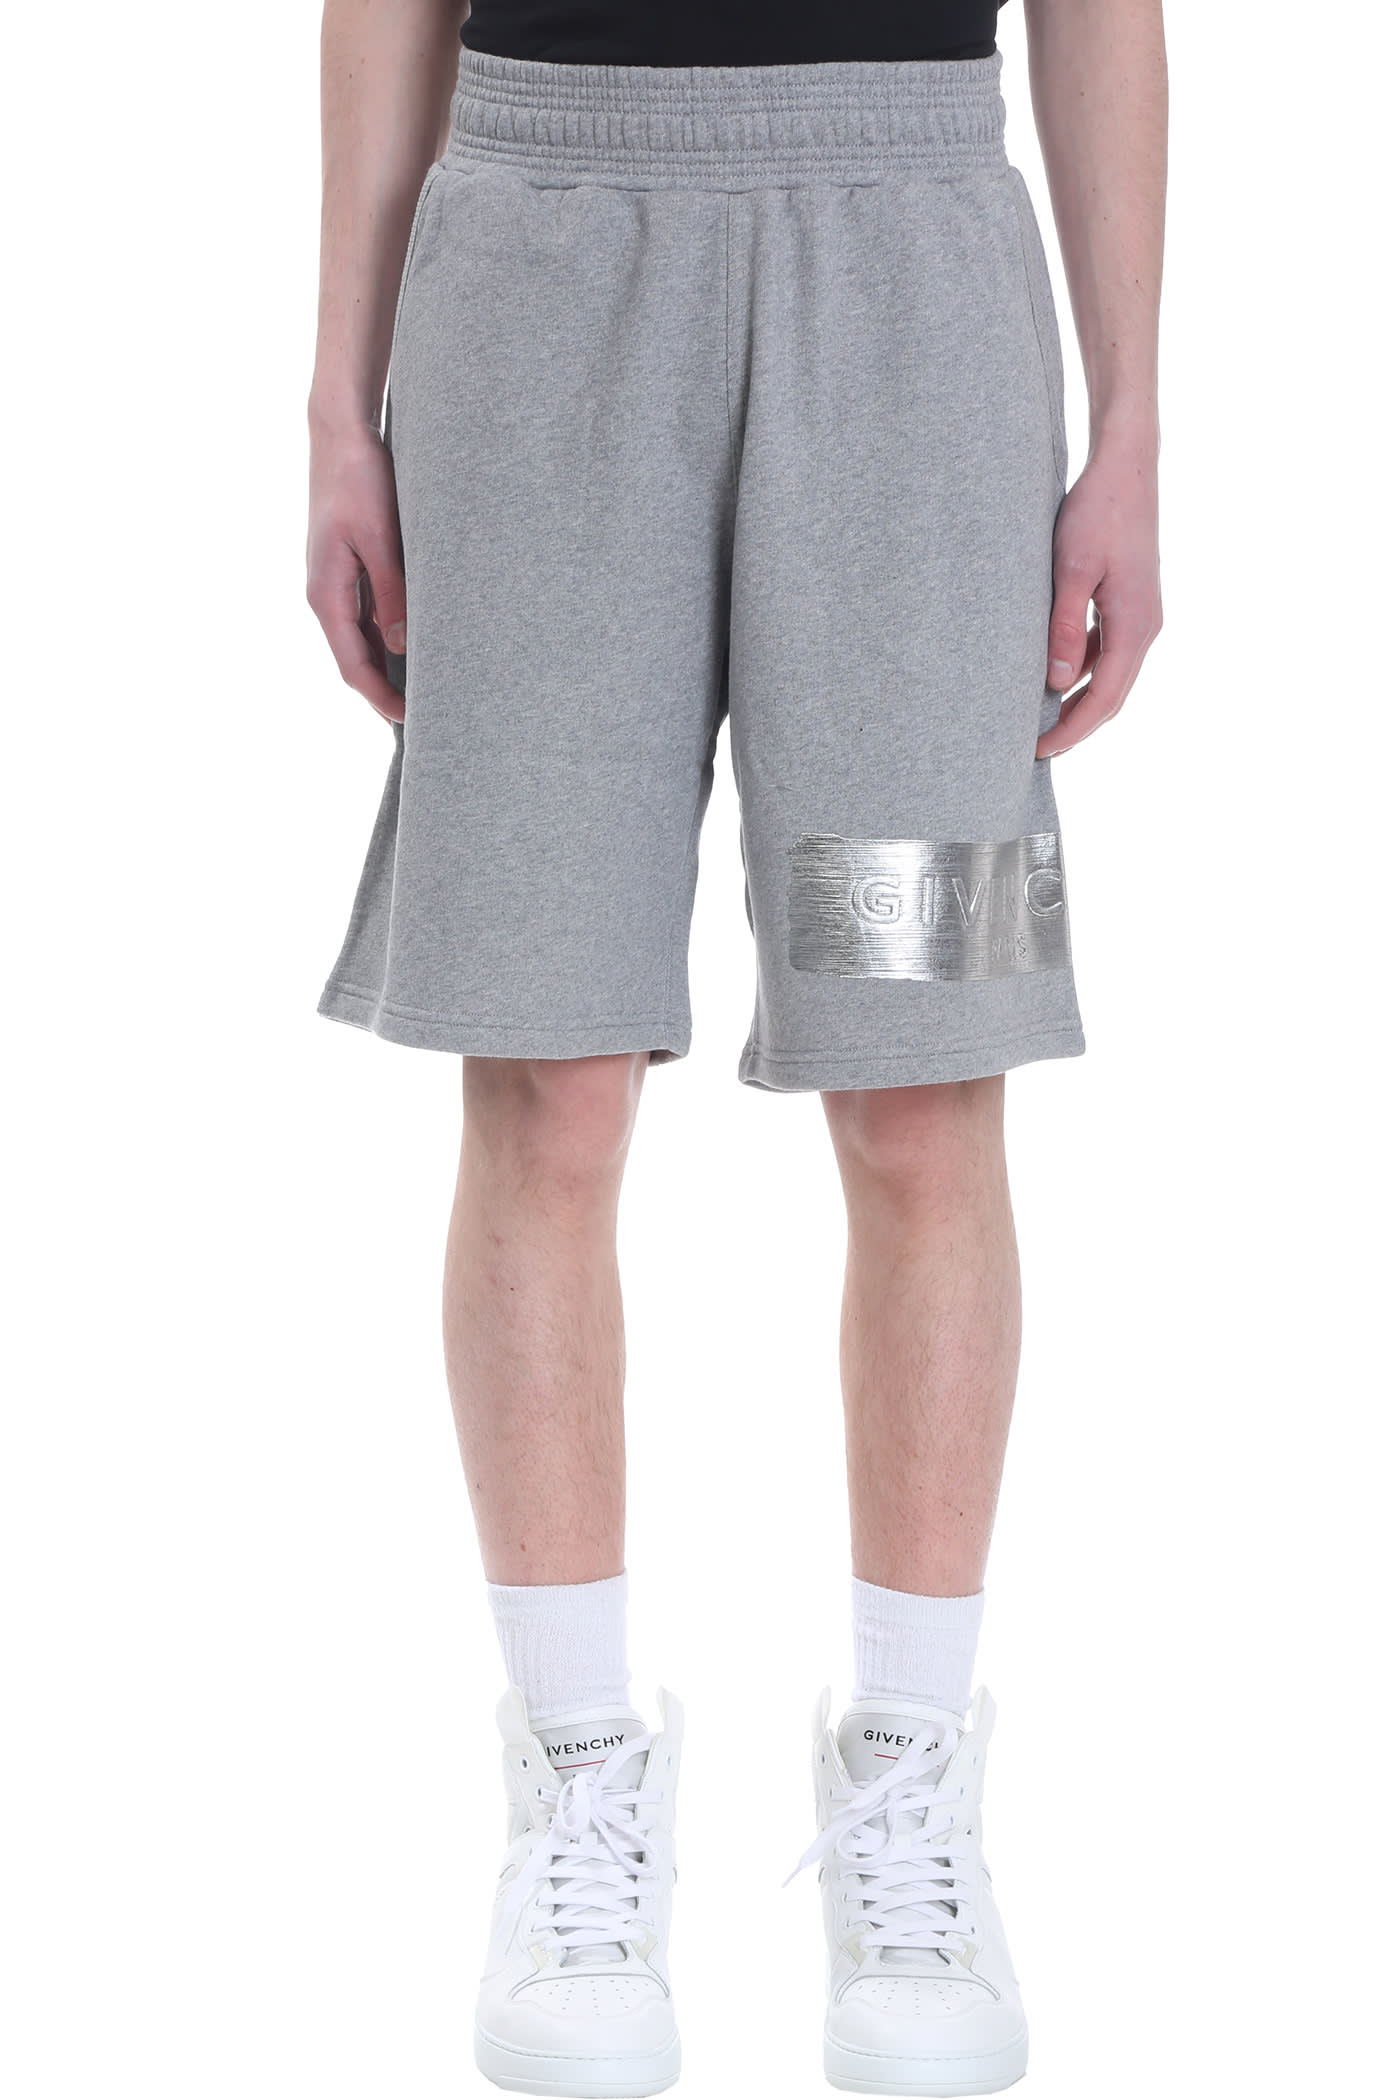 Givenchy Shorts In Grey Cotton